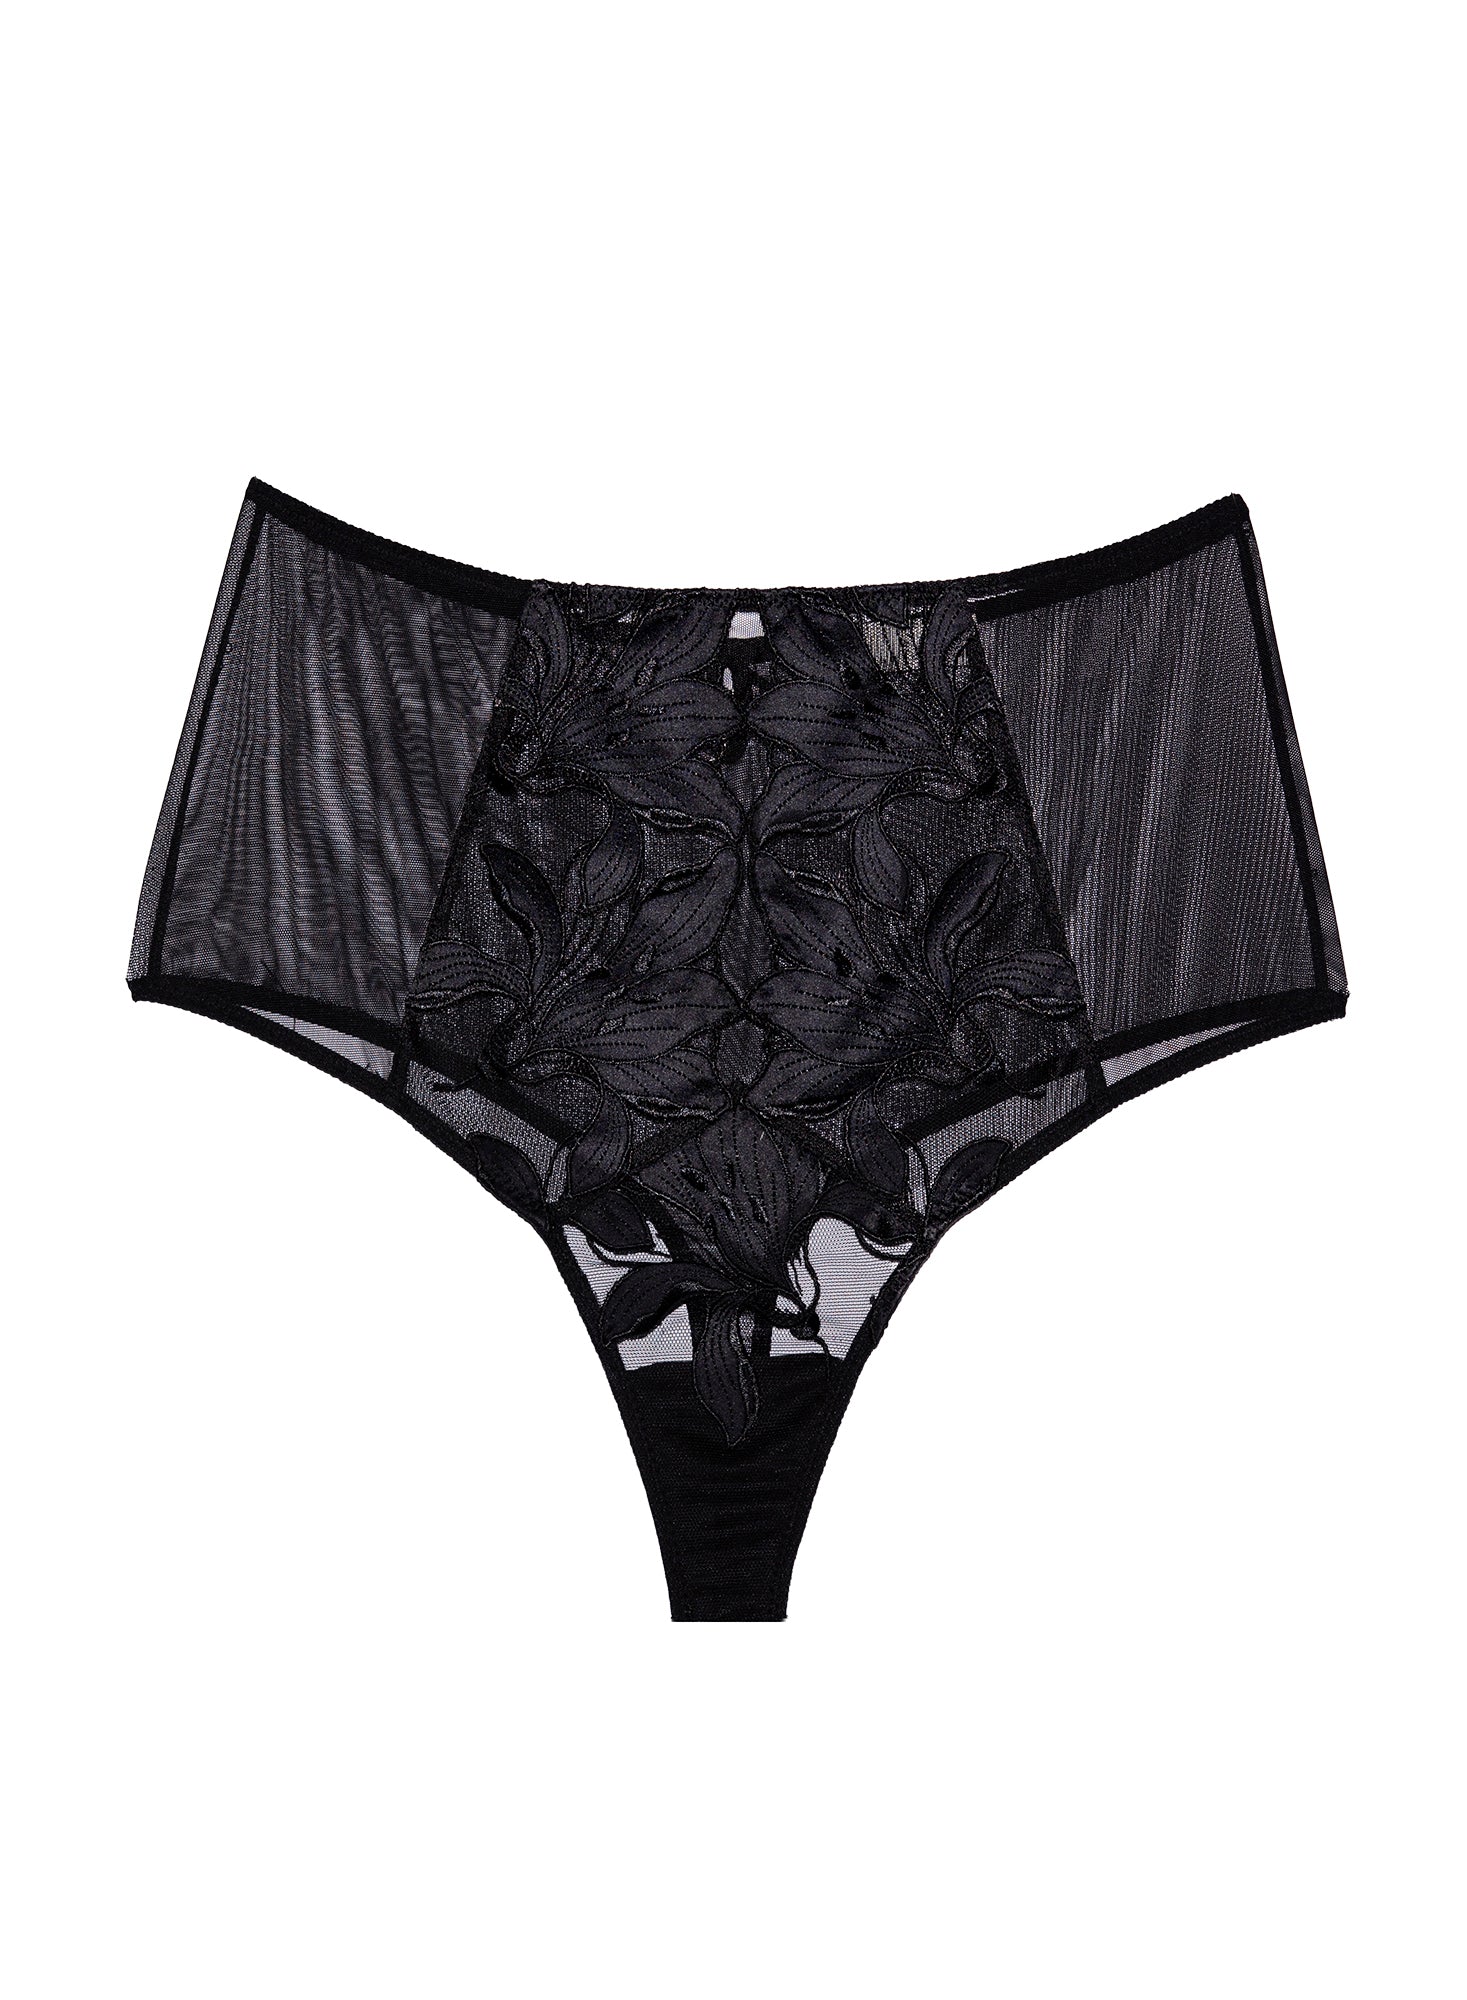 Victoria's Secret Small Black Luxe Embroidered High Waist Cheeky